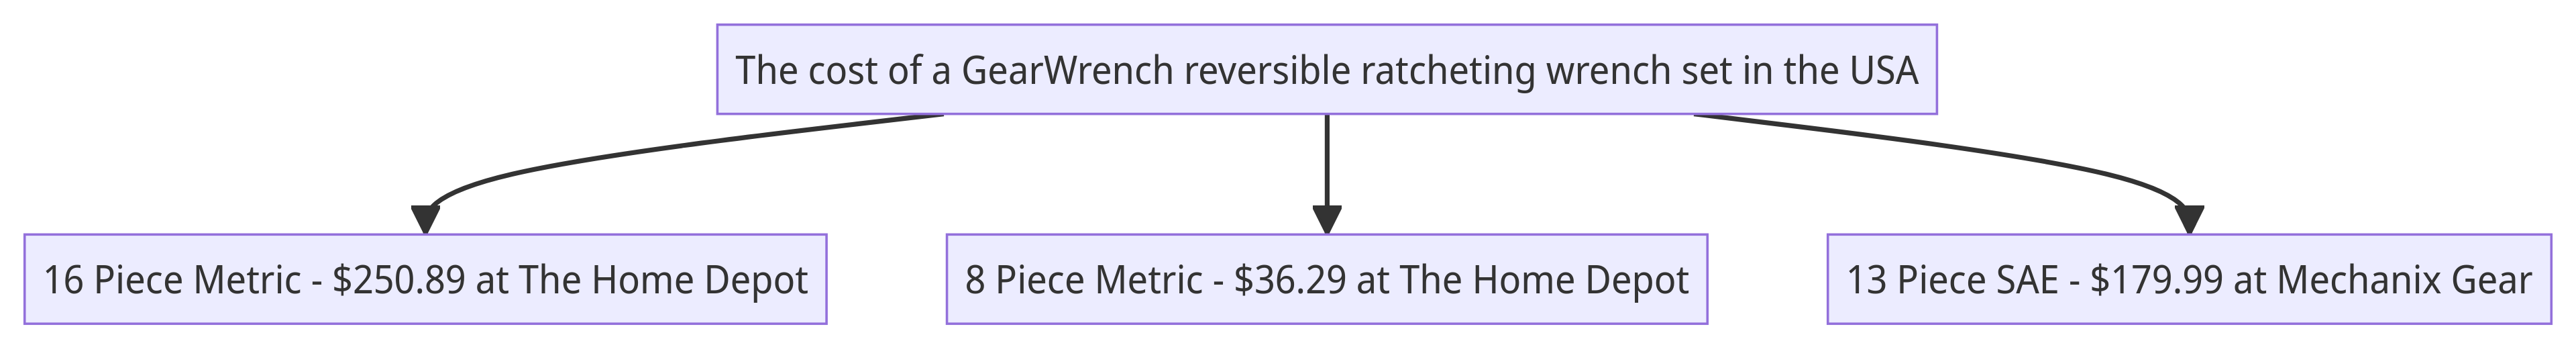 Flowchart of GearWrench Reversible Ratcheting Wrench Set Prices